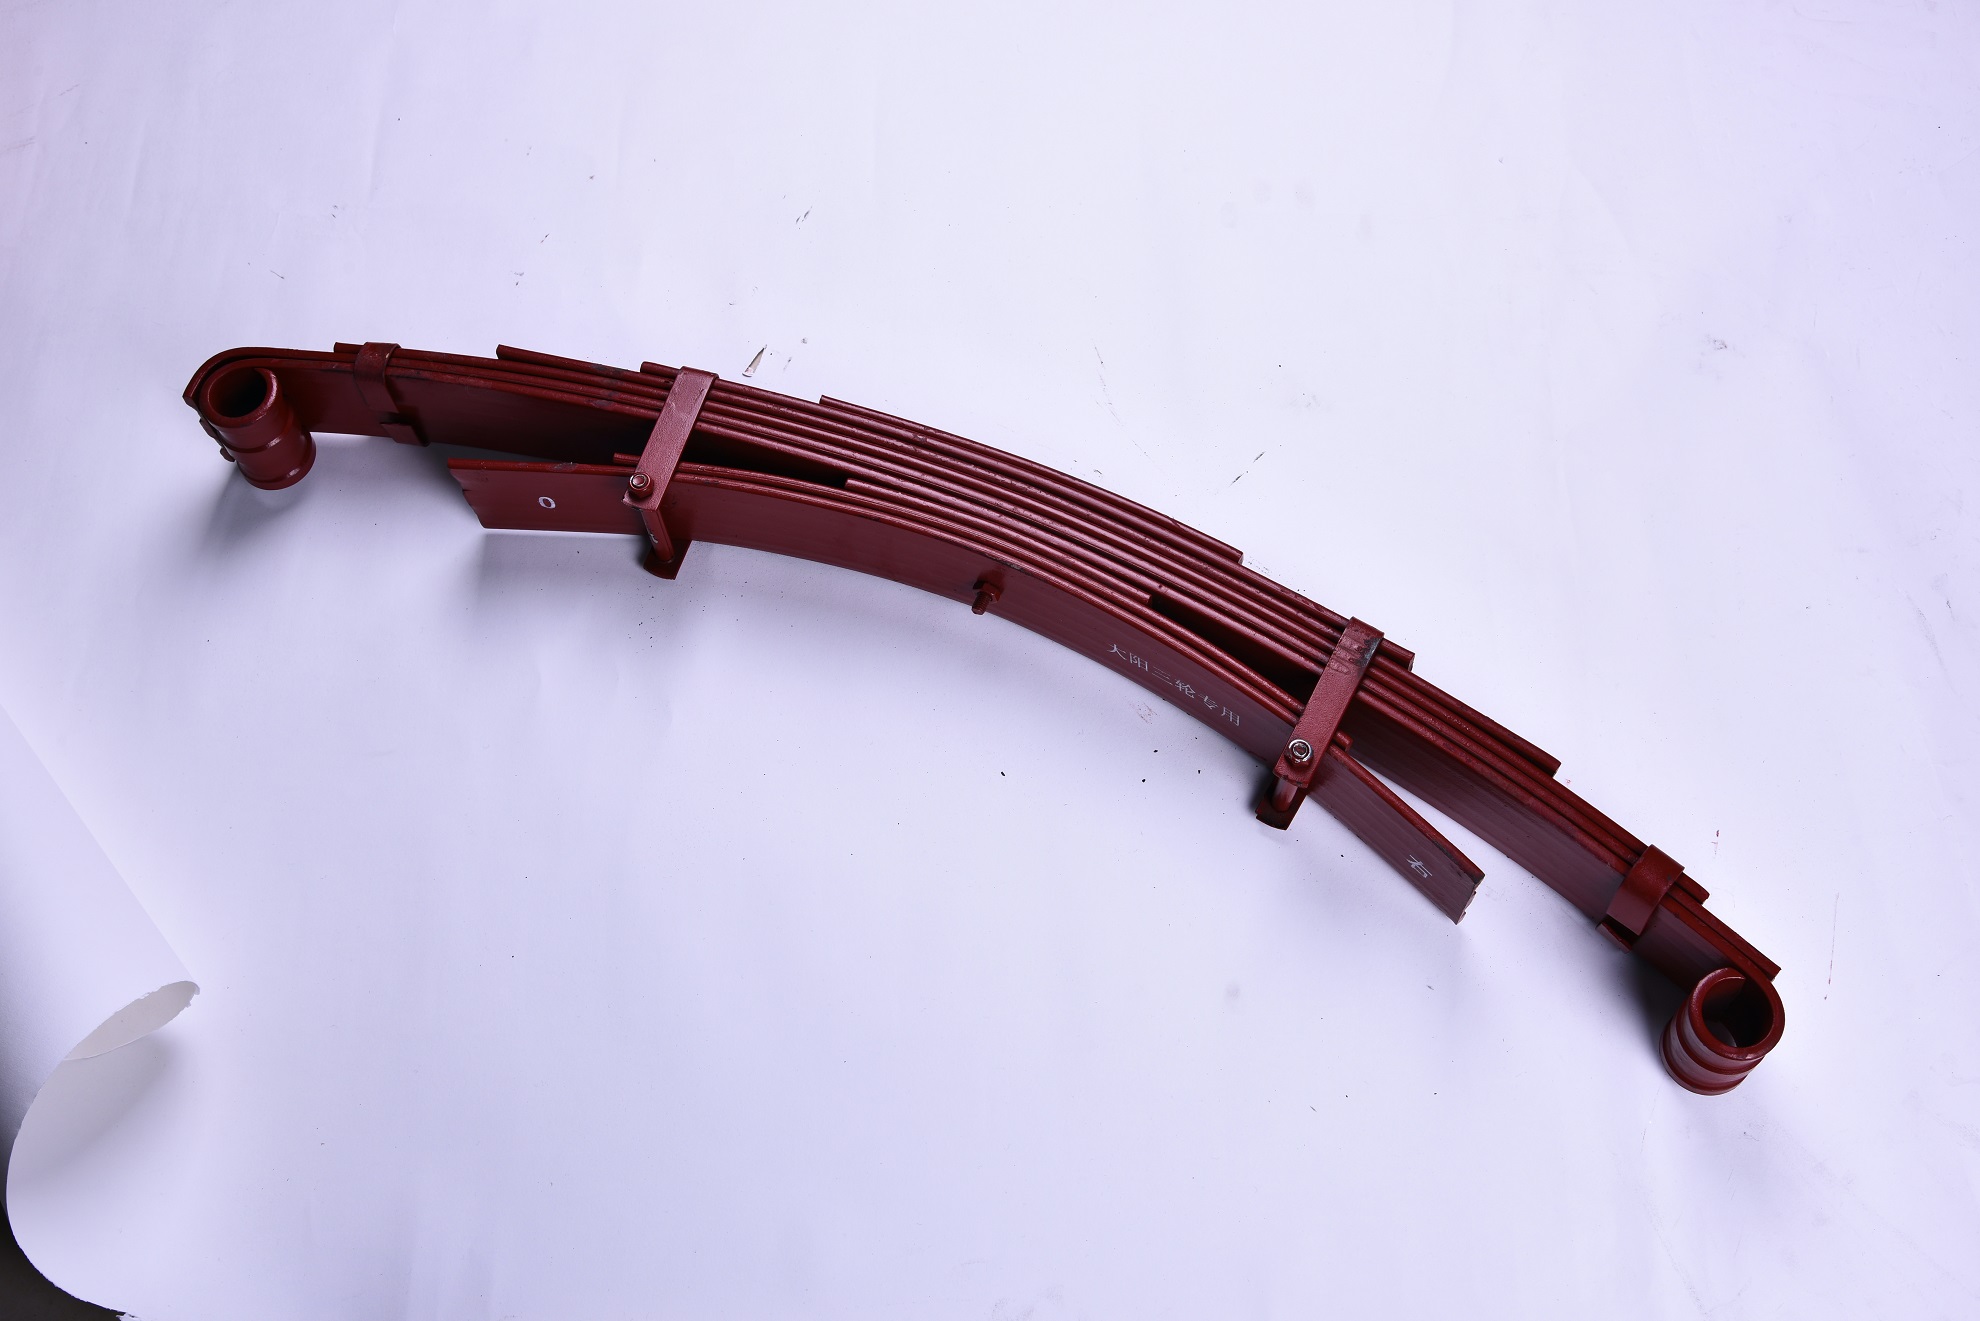 New Style High Precision Heavy duty leaf spring for tricycle